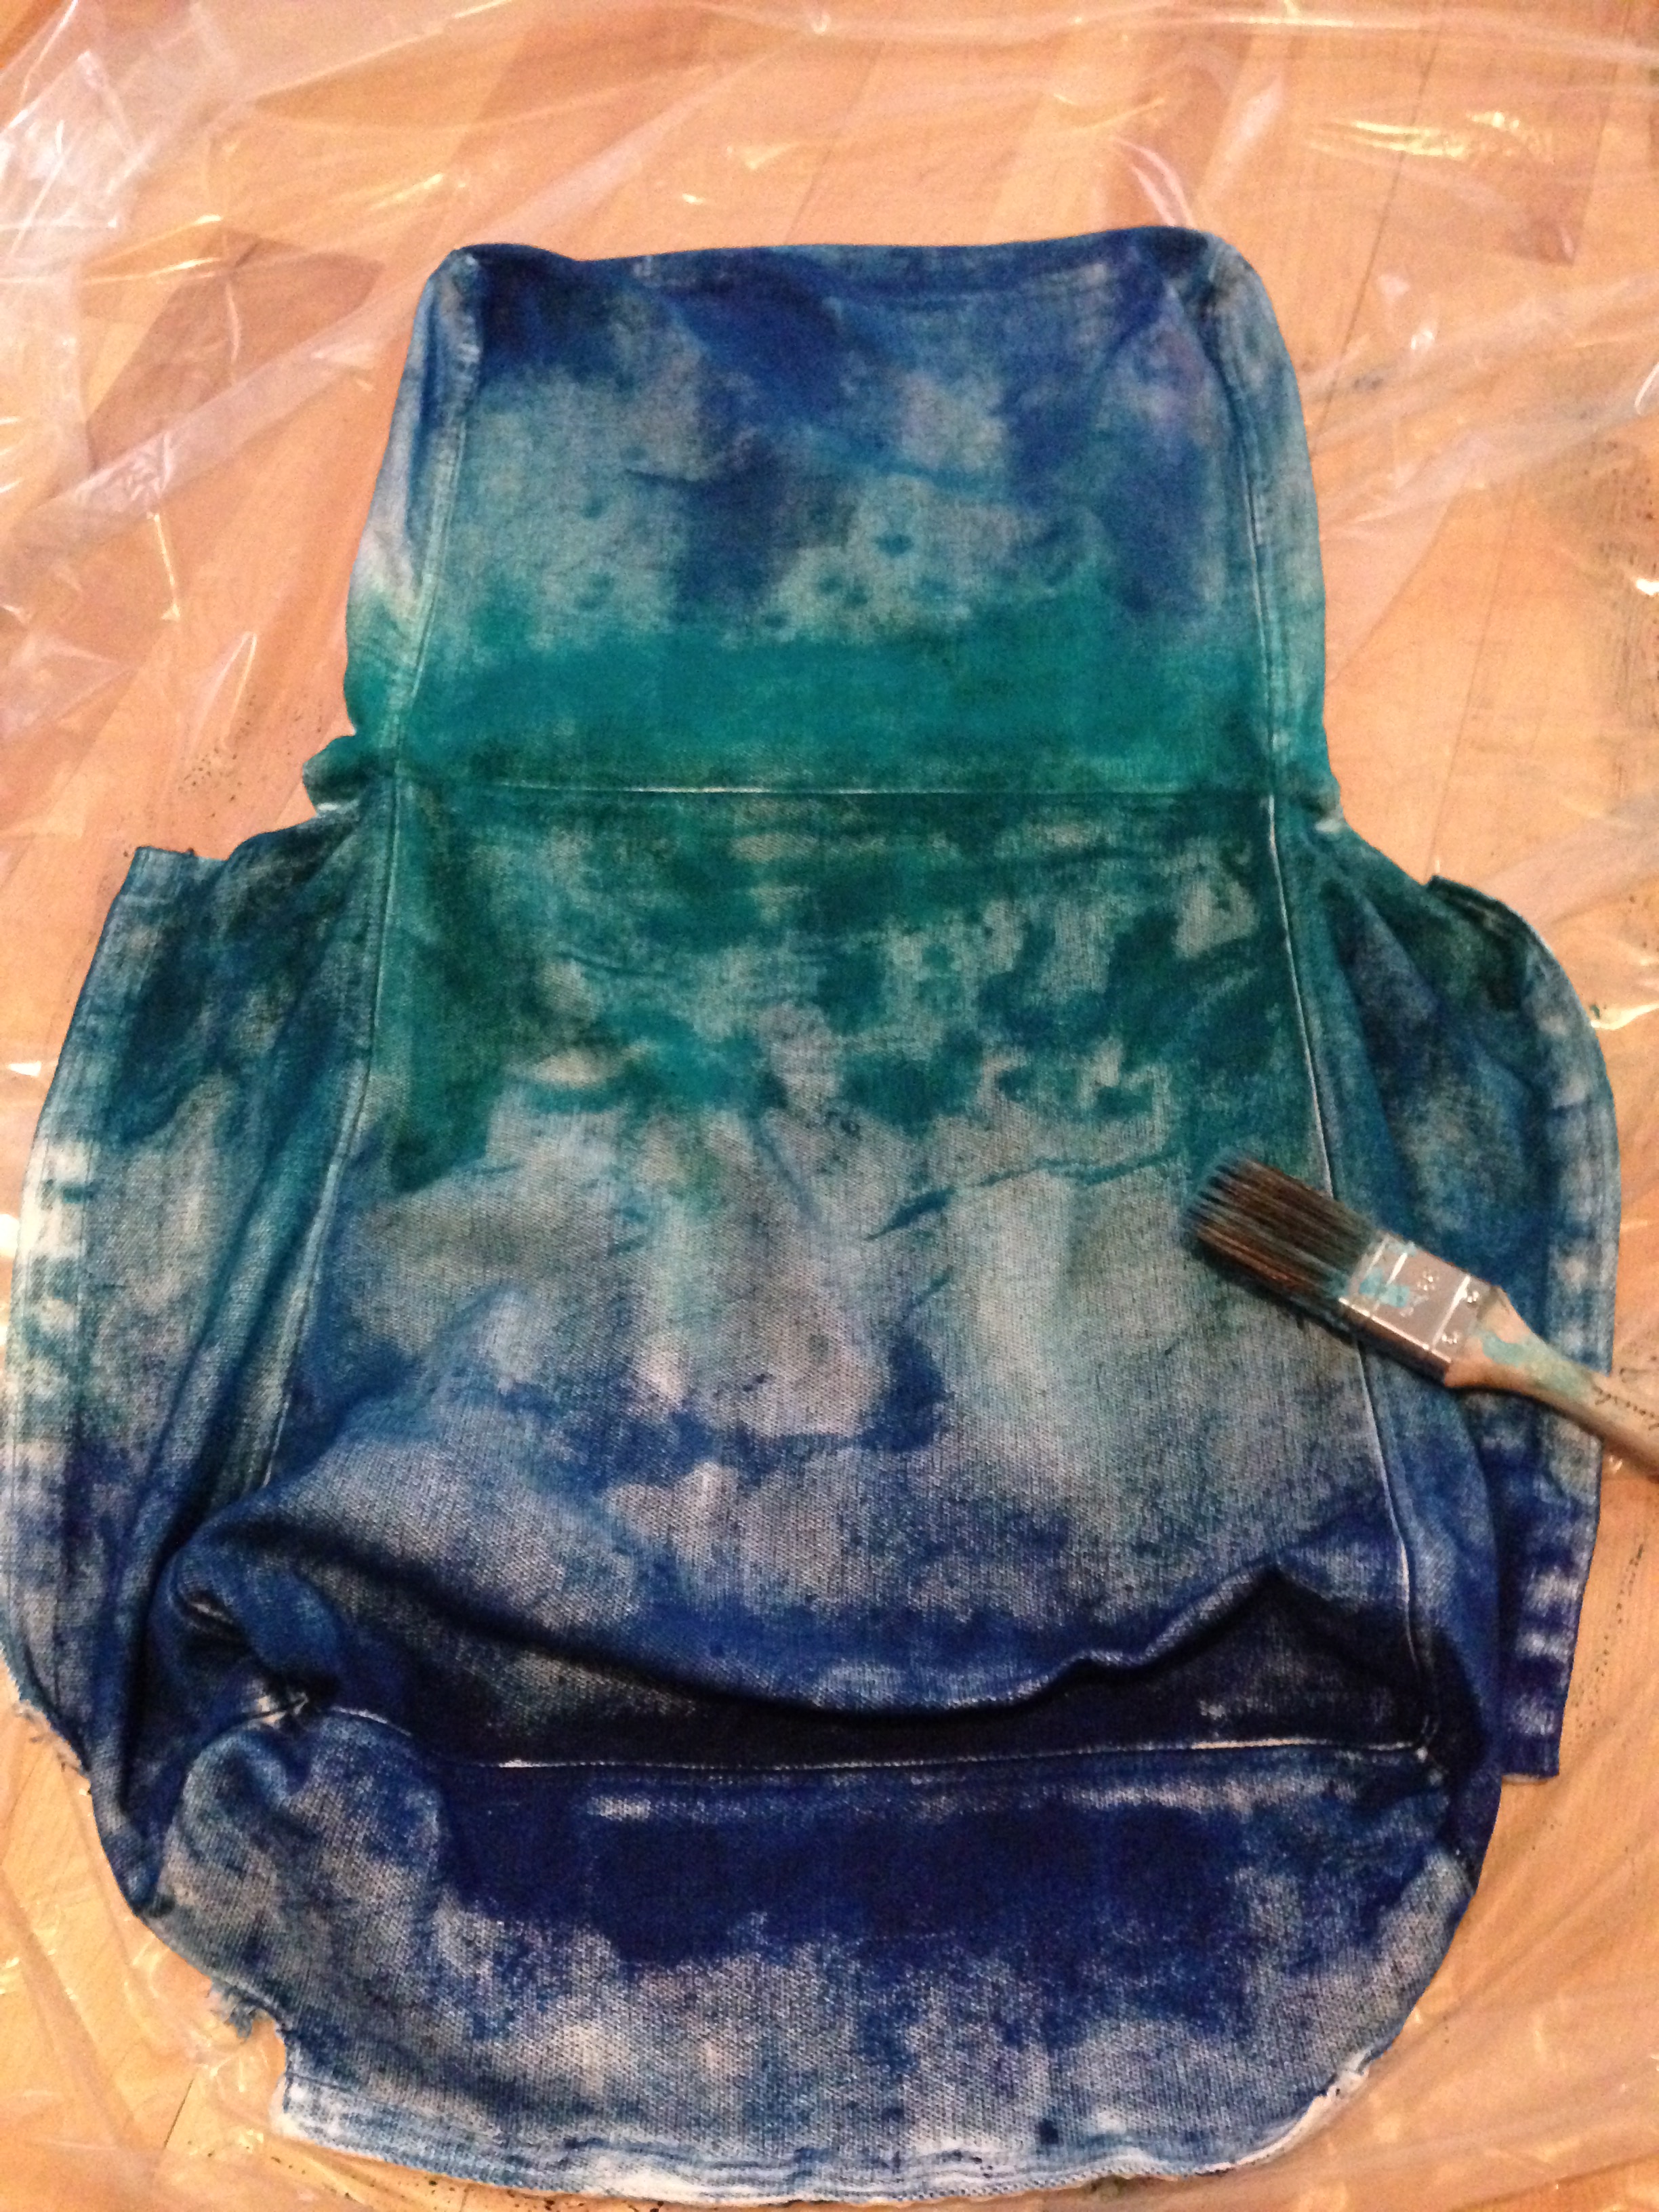 Tie-dying the chair covers